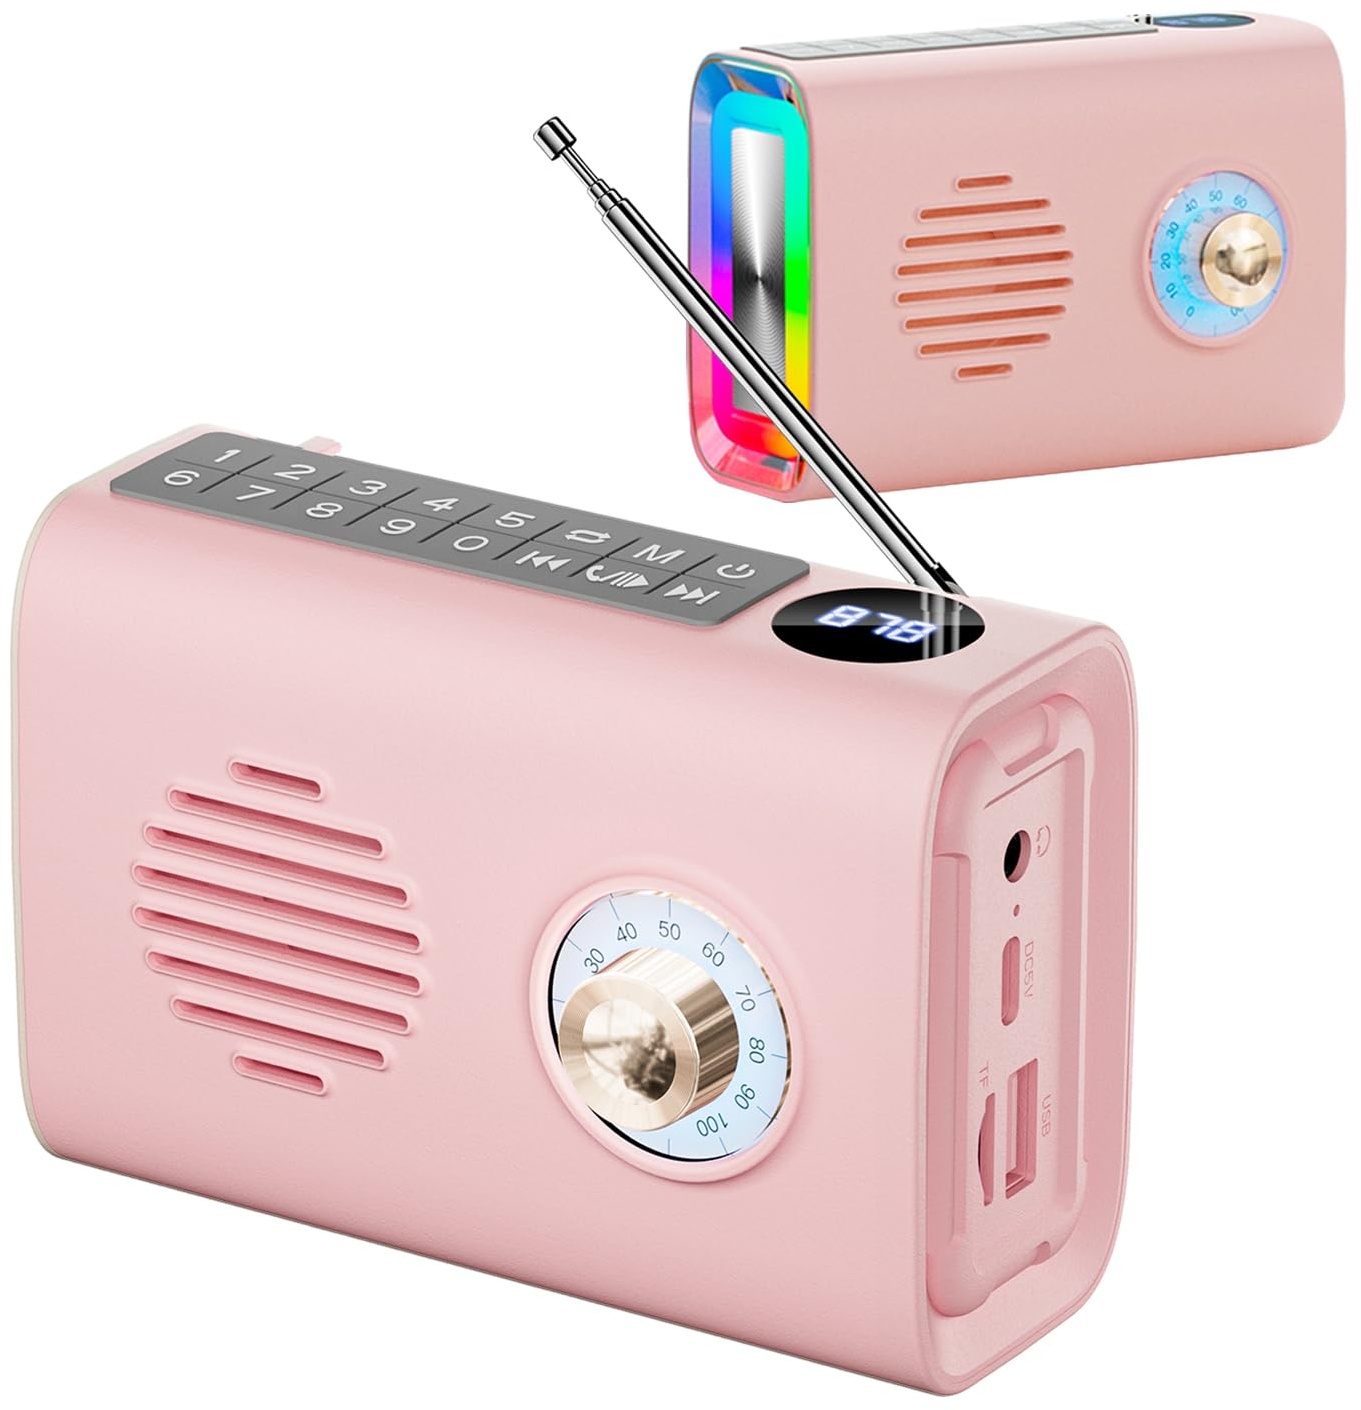 Portable Bluetooth Speaker With Light,Vintage FM Radio With RGB Light, Strong Bass Enhancement,with U Disk/TF Card/Aux Player Function,Solar Powered Wireless Speakers for Home, Office Decor (Rosa)